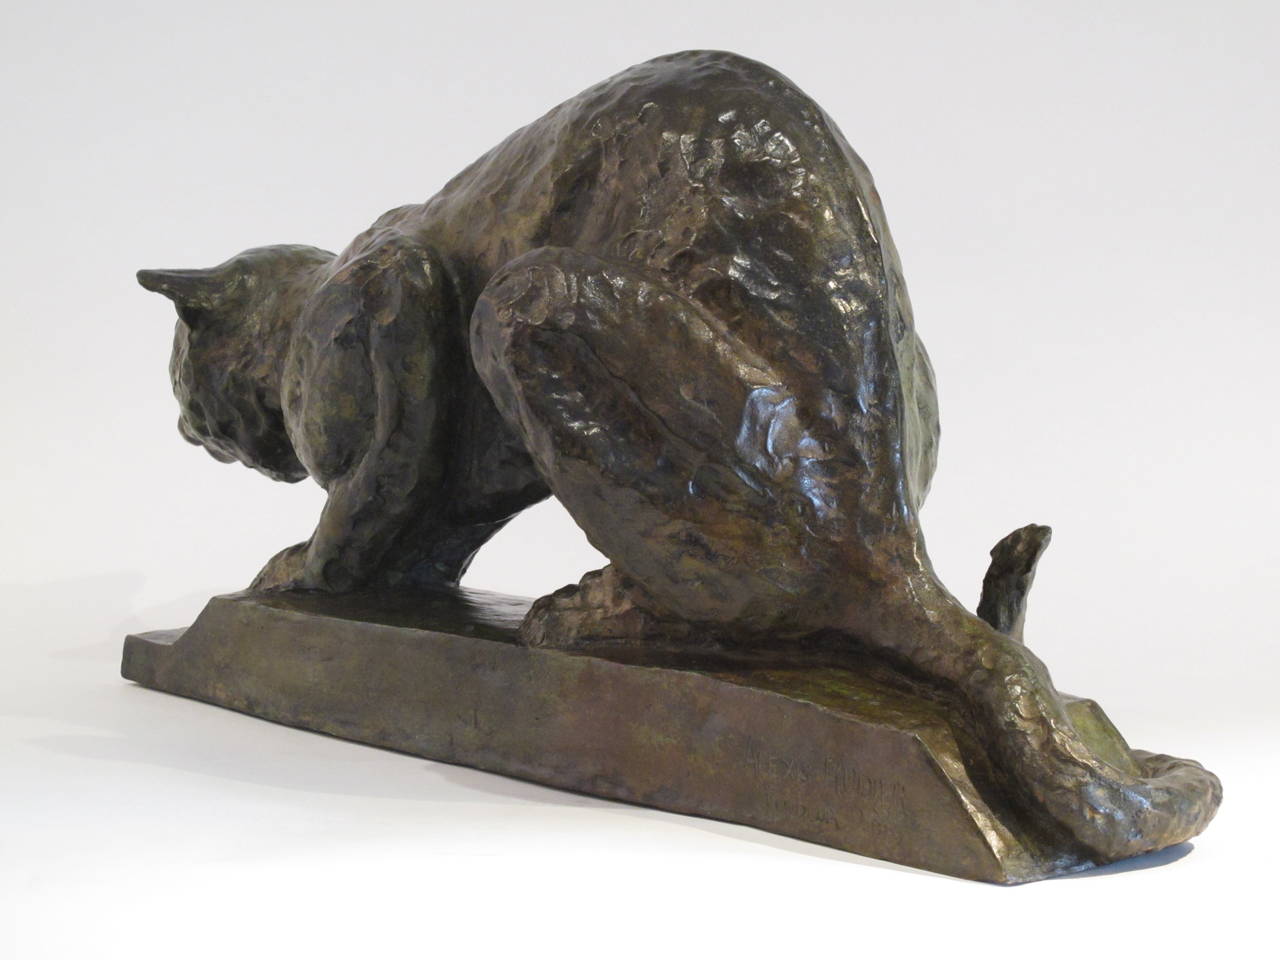 A rare, fine quality, late 19th century bronze model of a Cat / panther. This sculpture was cast in bronze by the lost wax process at the famous Alexis  Rudier Foundry, Paris circa 1890.
This cast has a medium green/ brown patina.